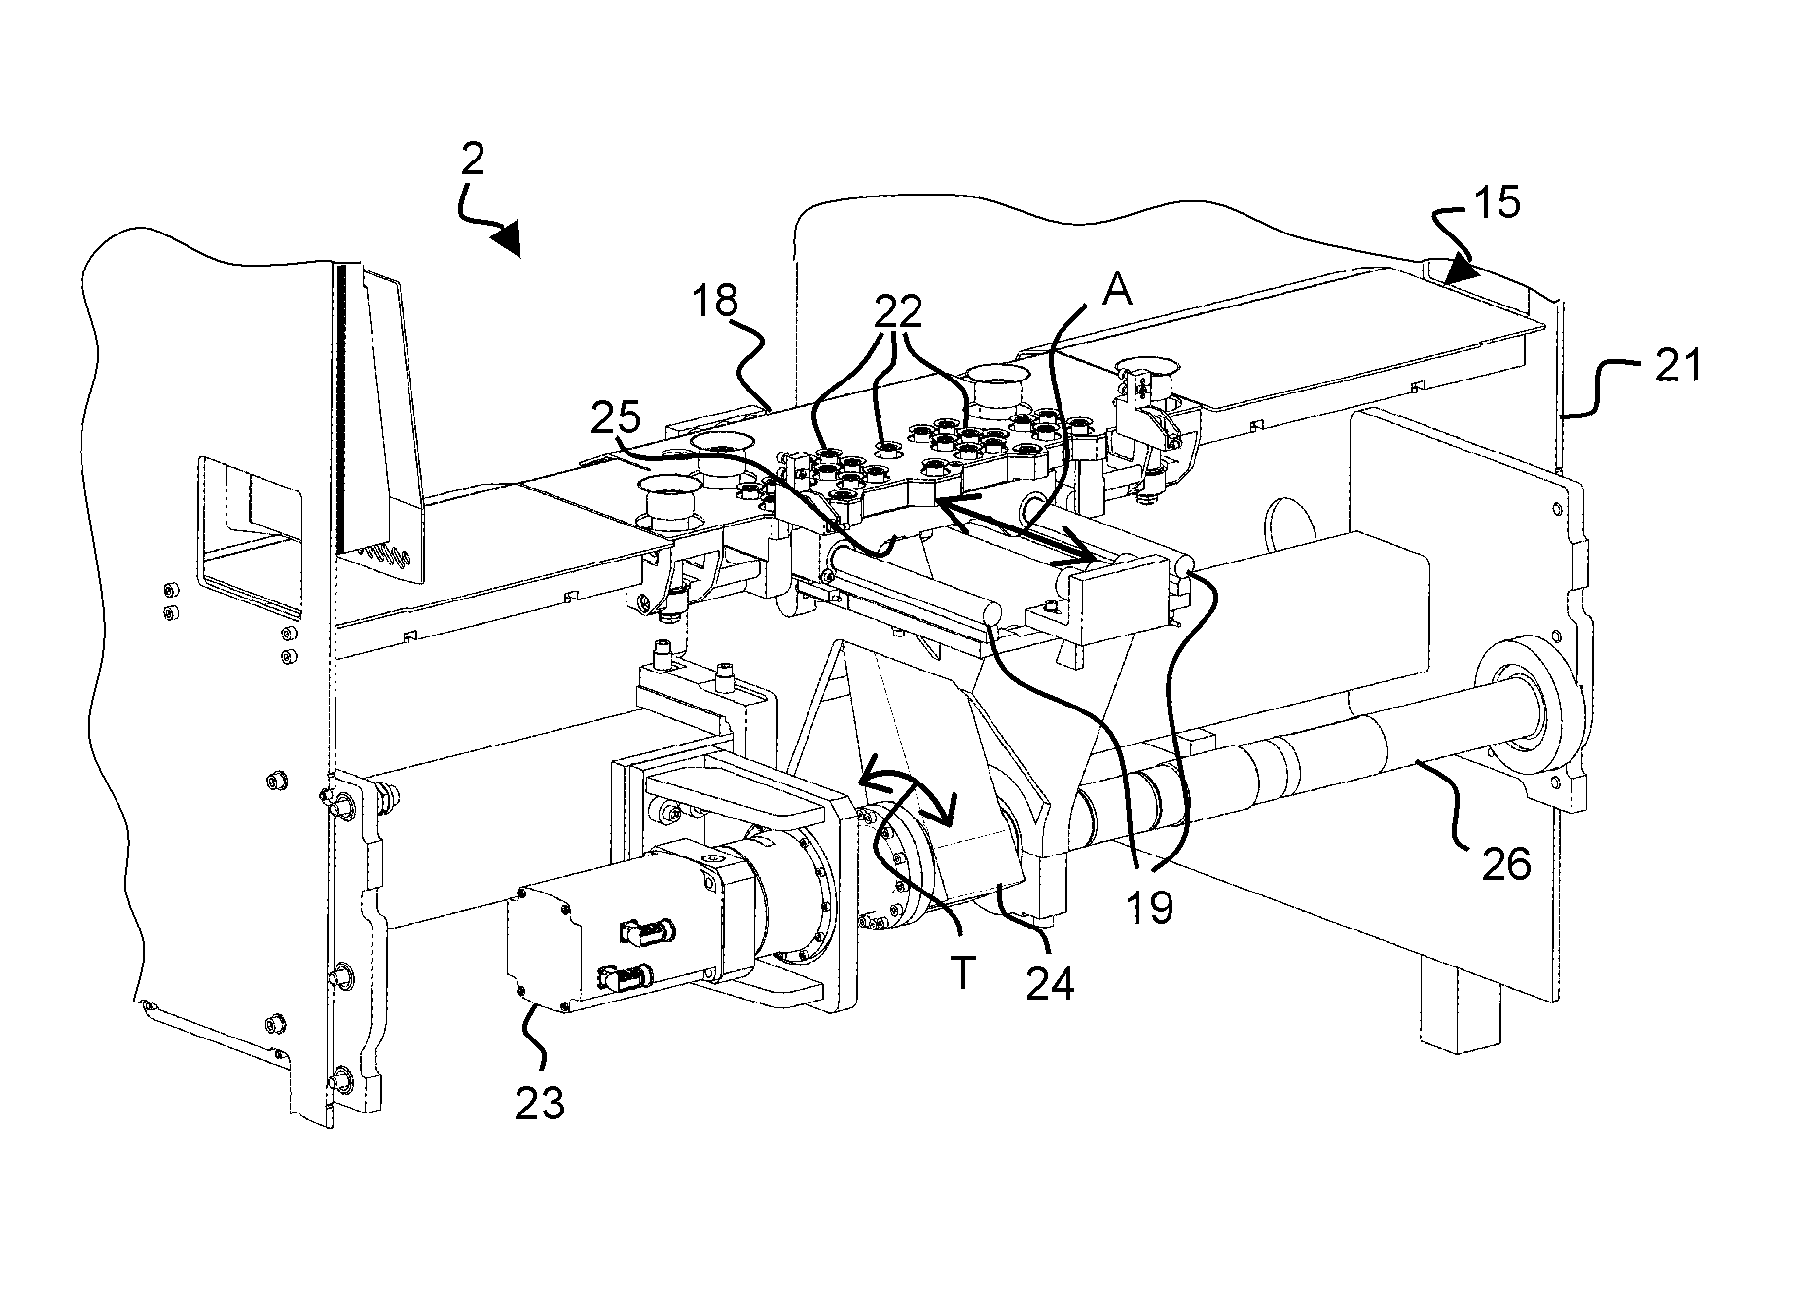 Device for positioning a plate element in an infeed station of a processing machine